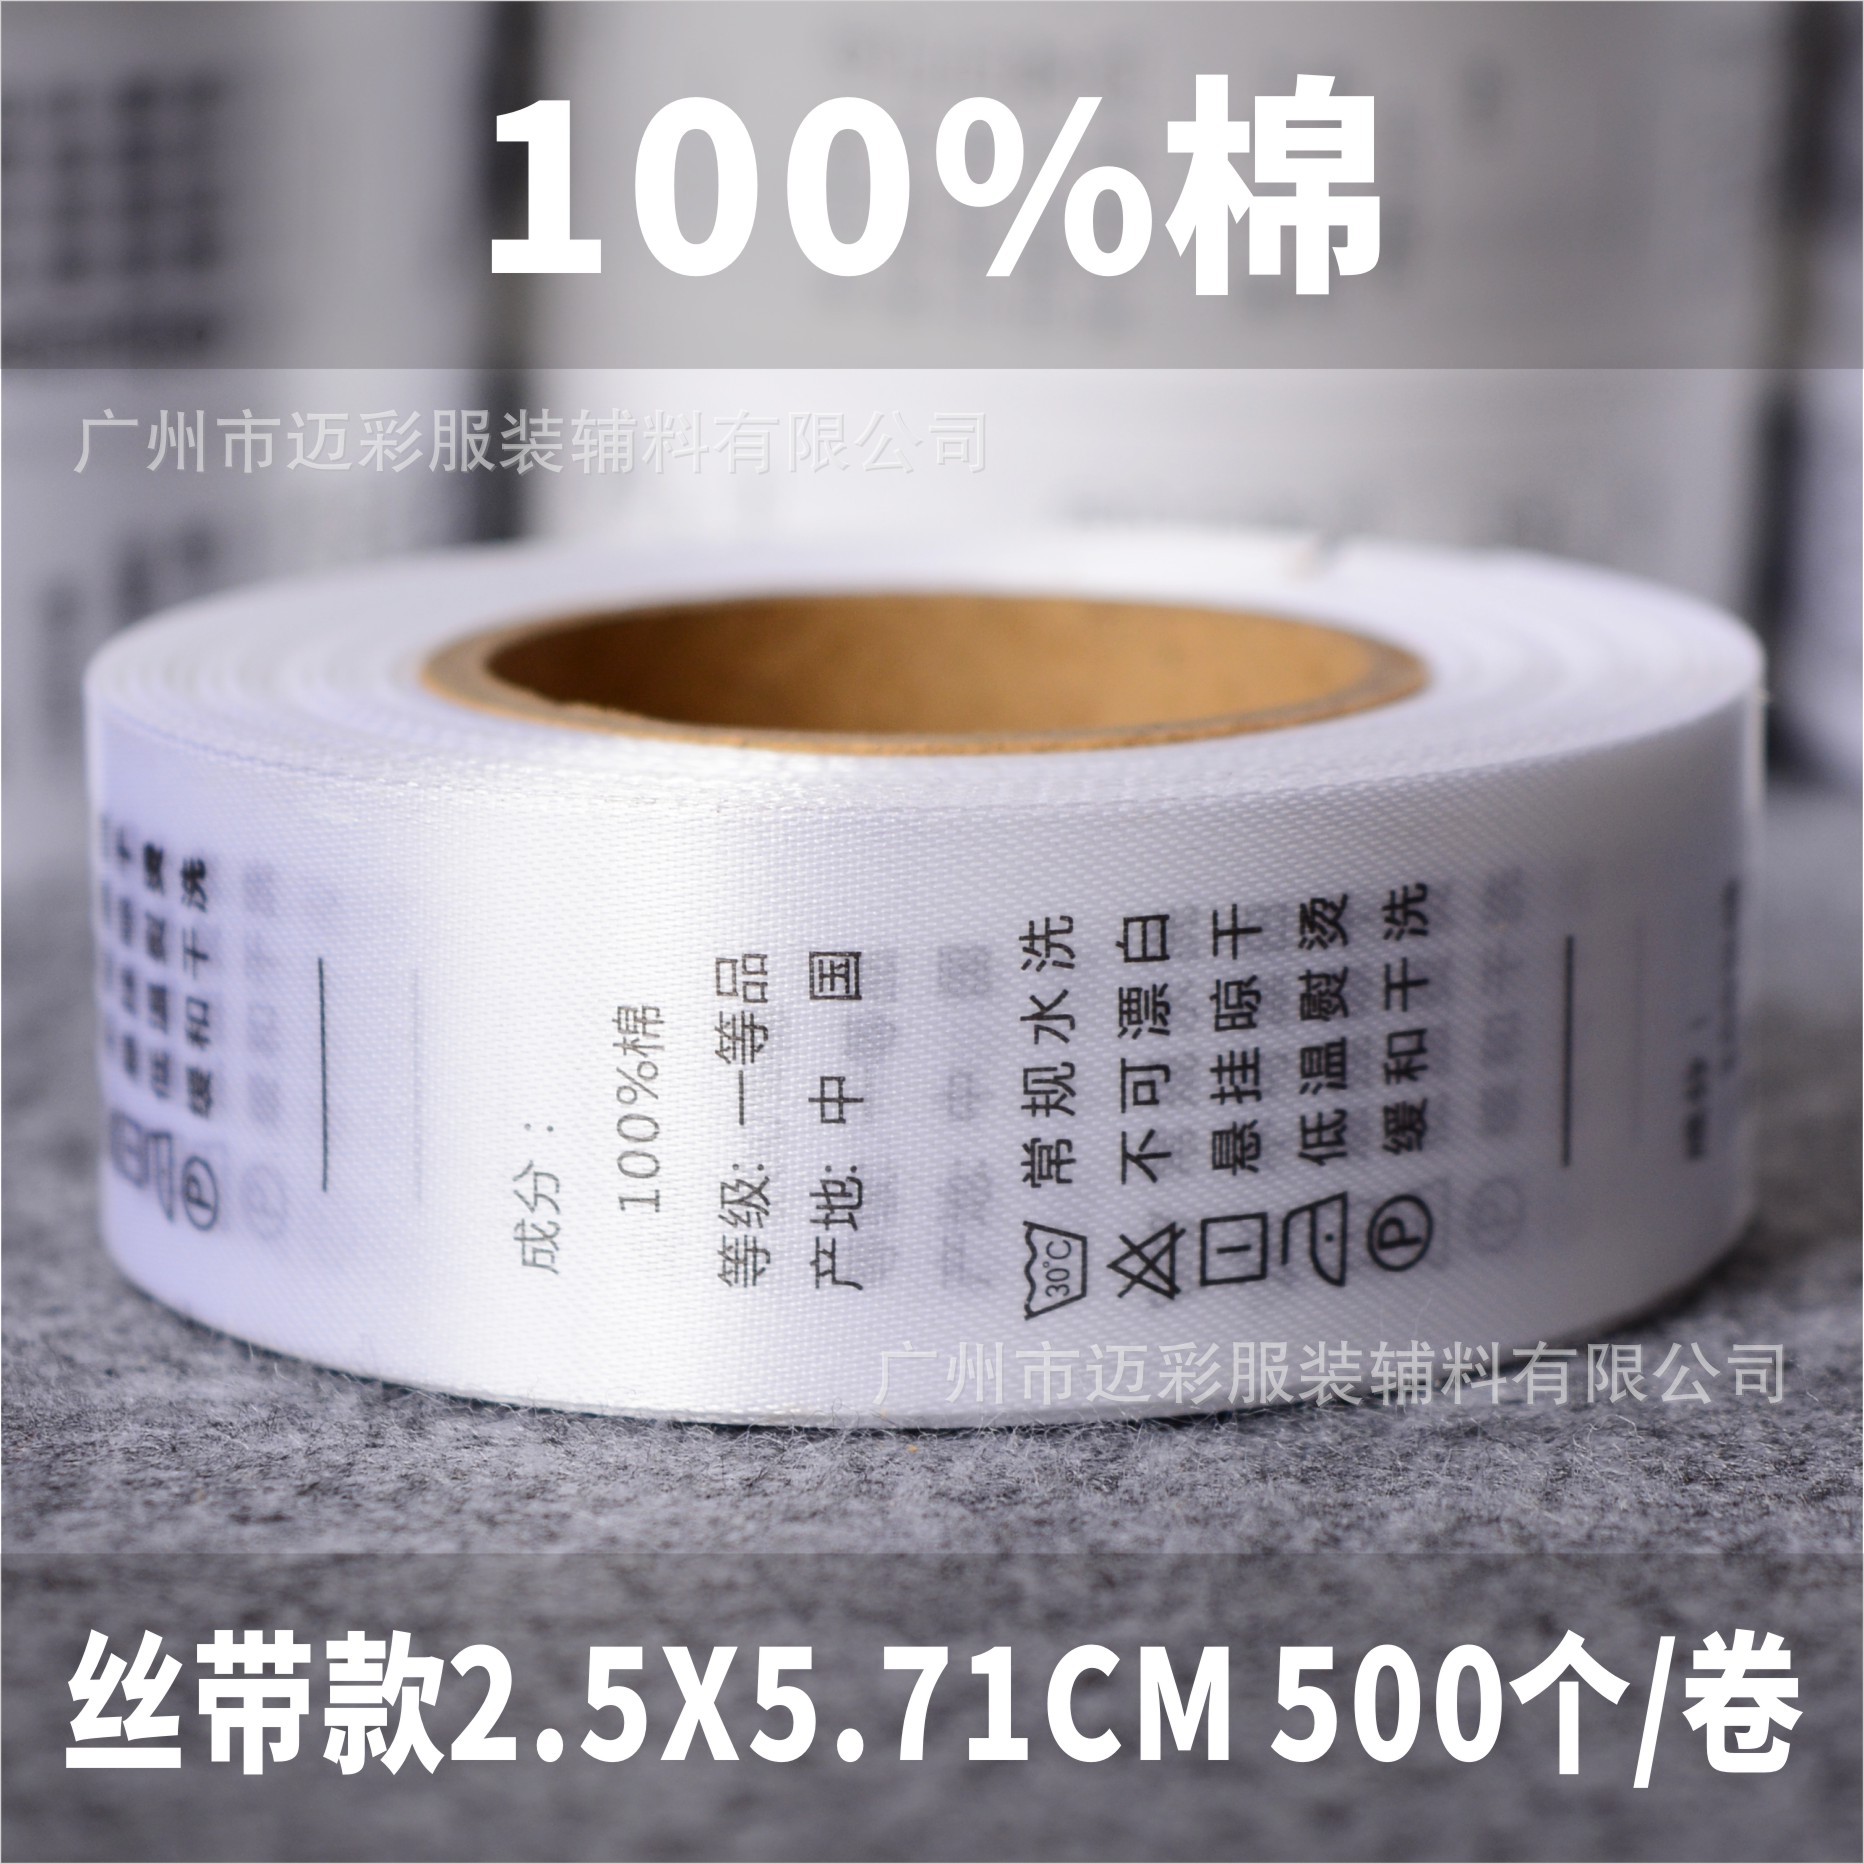 Sewn-in Label Spot Clothing Care Label Printed Label Side Seam Label Cloth Label Collar Lable Washing Label Logo Trademark